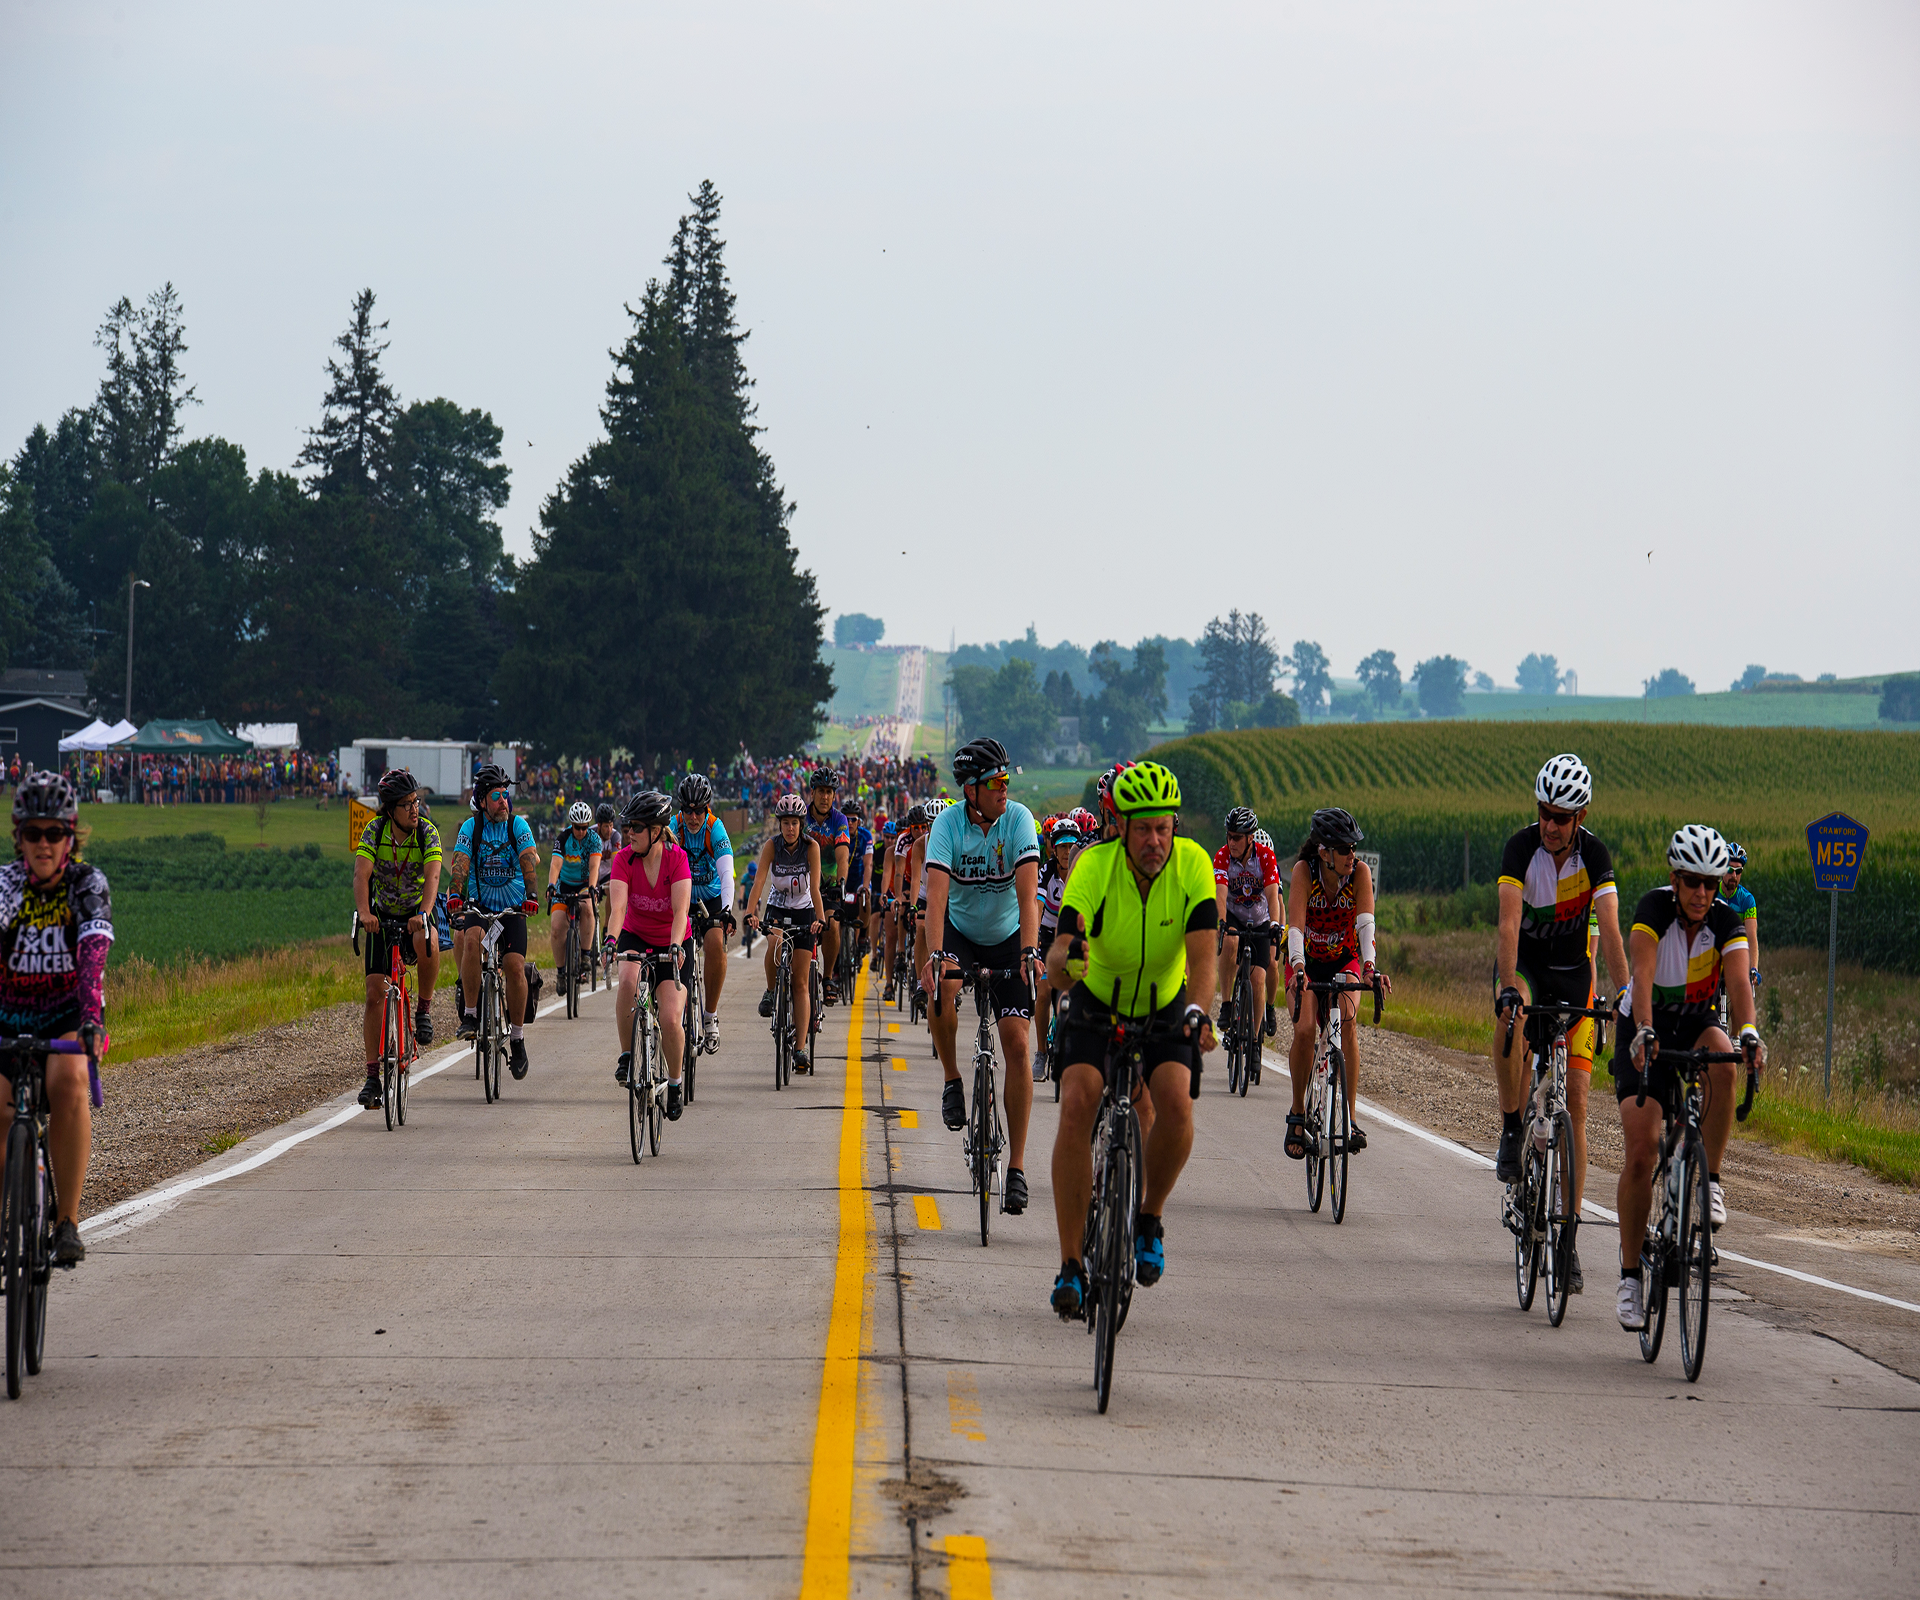 A large pack of RAGBRAI bikers pedal through the rural cornfields in Iowa on July 23. (Roman Slabach/The Daily Iowan)